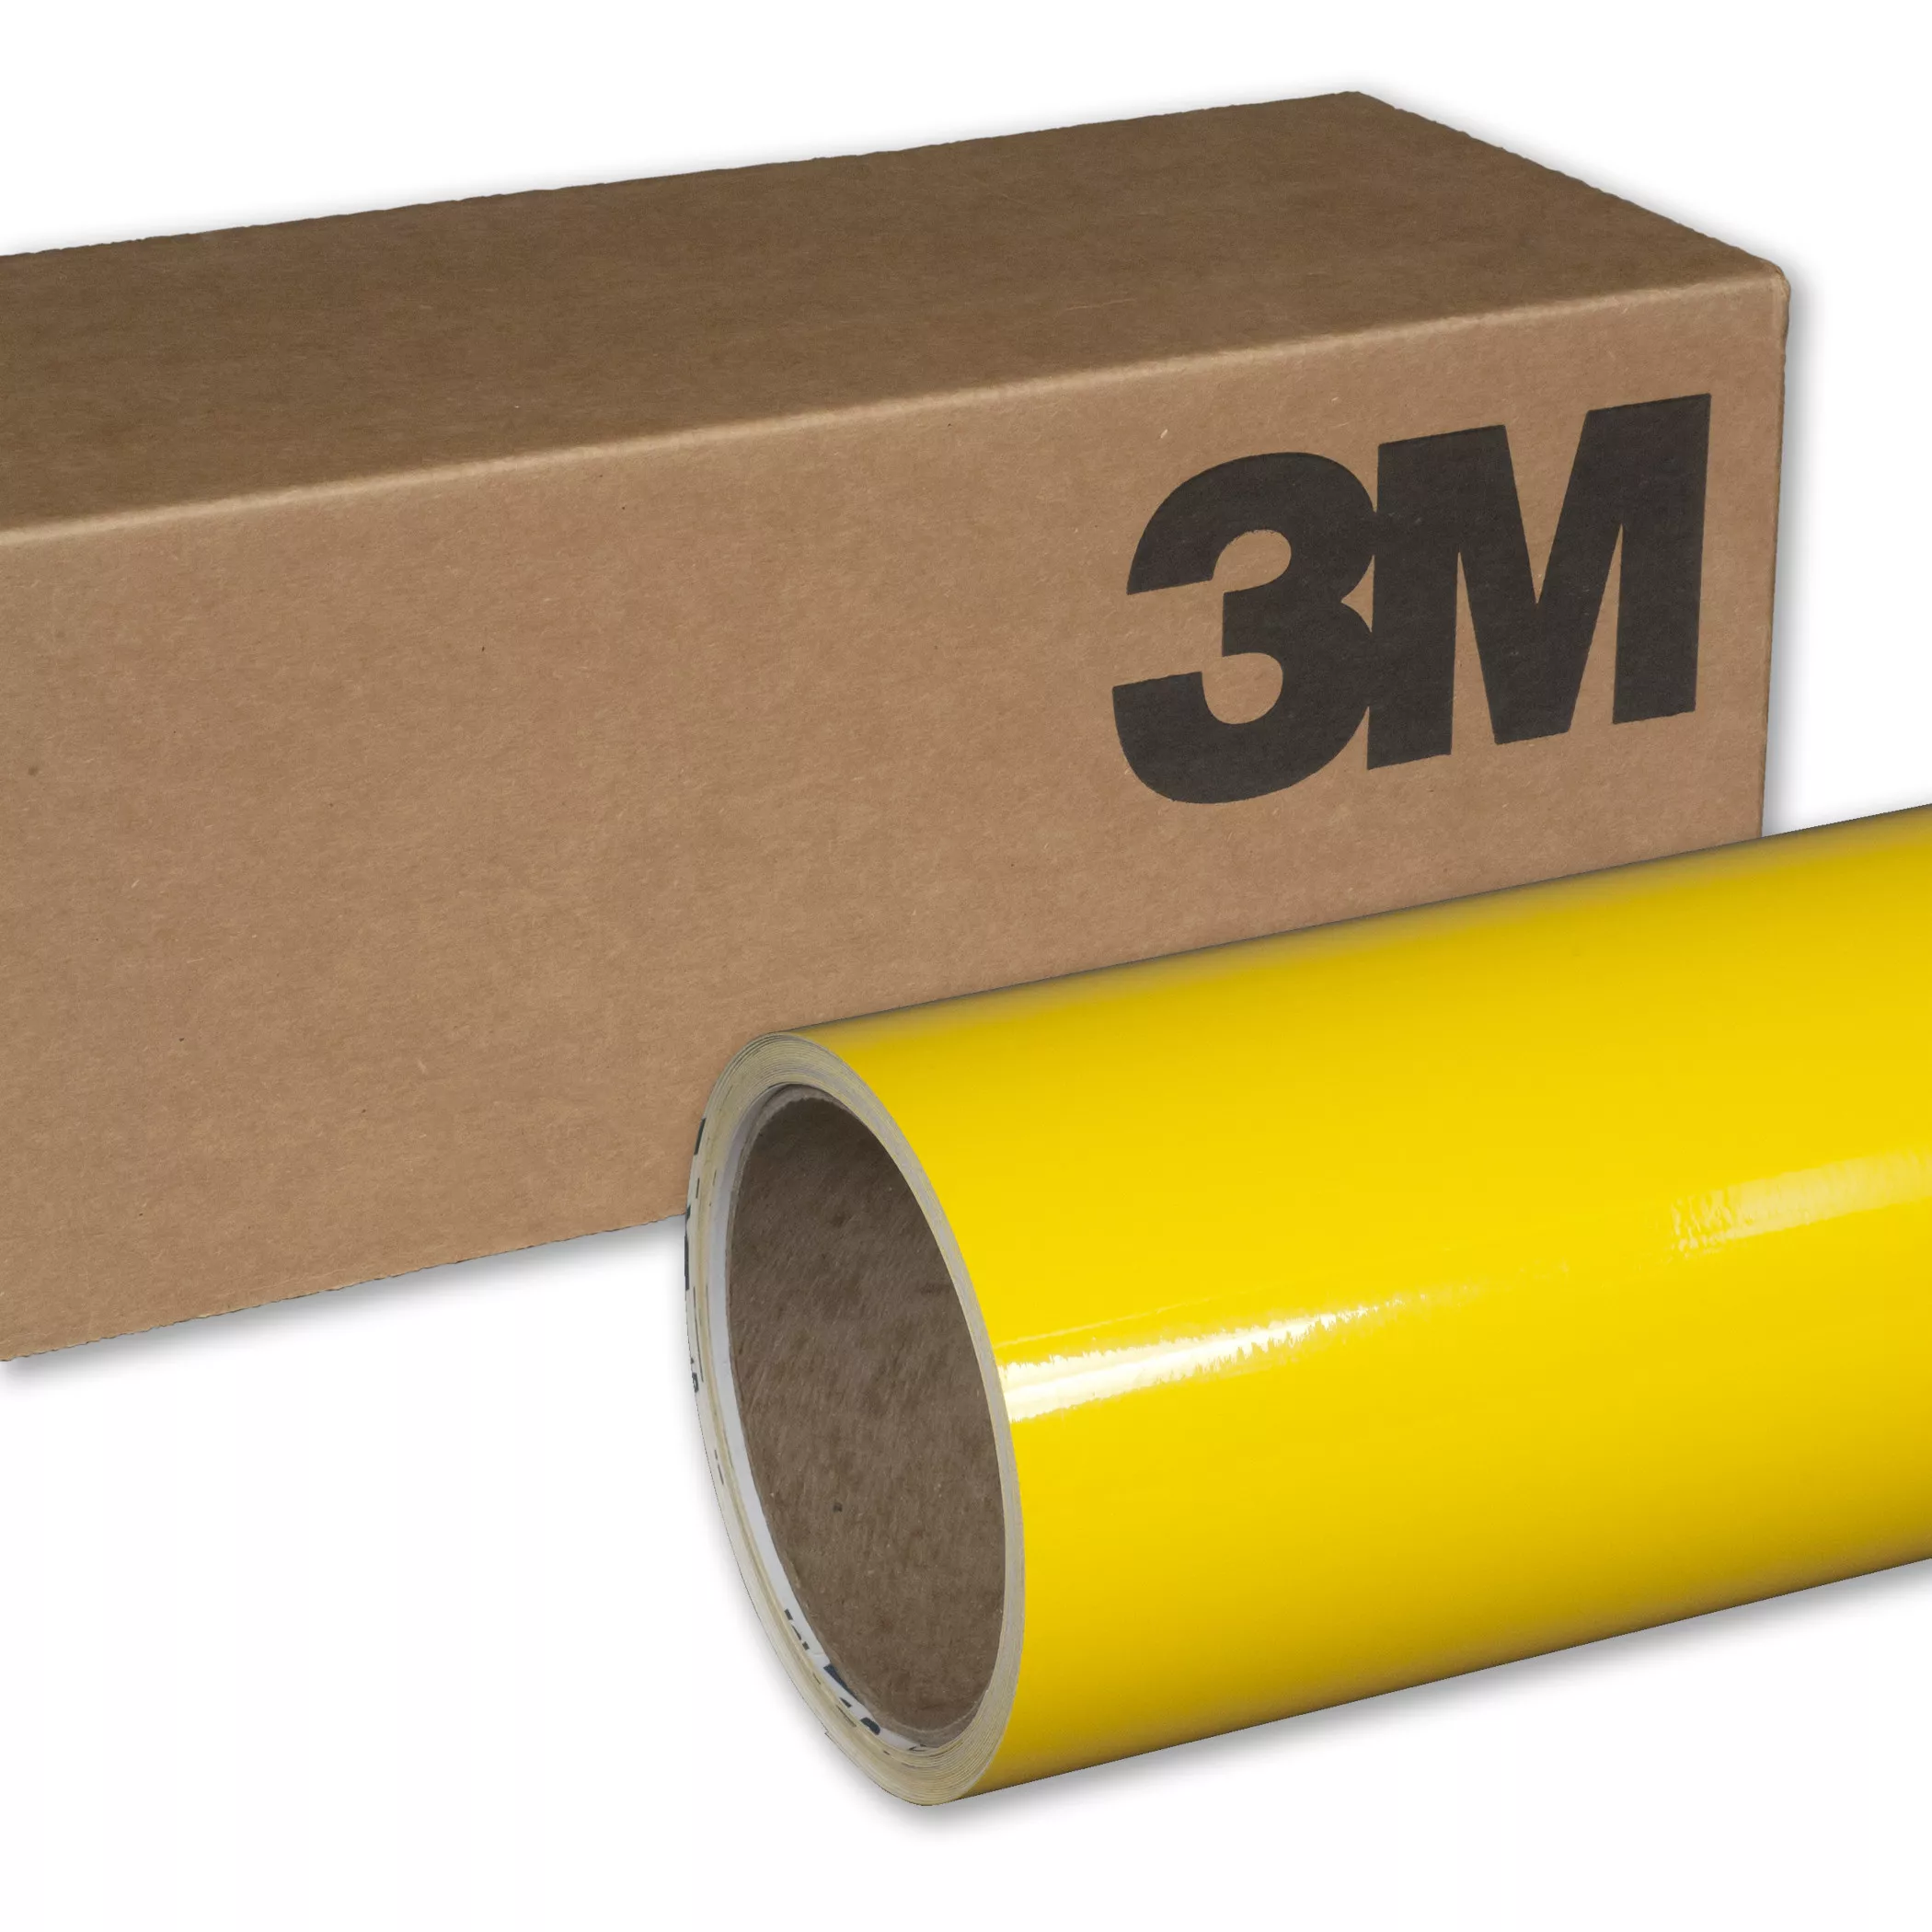 3M™ Wrap Film Series 1080-G15, Gloss Bright Yellow, 60 in x 10 yd